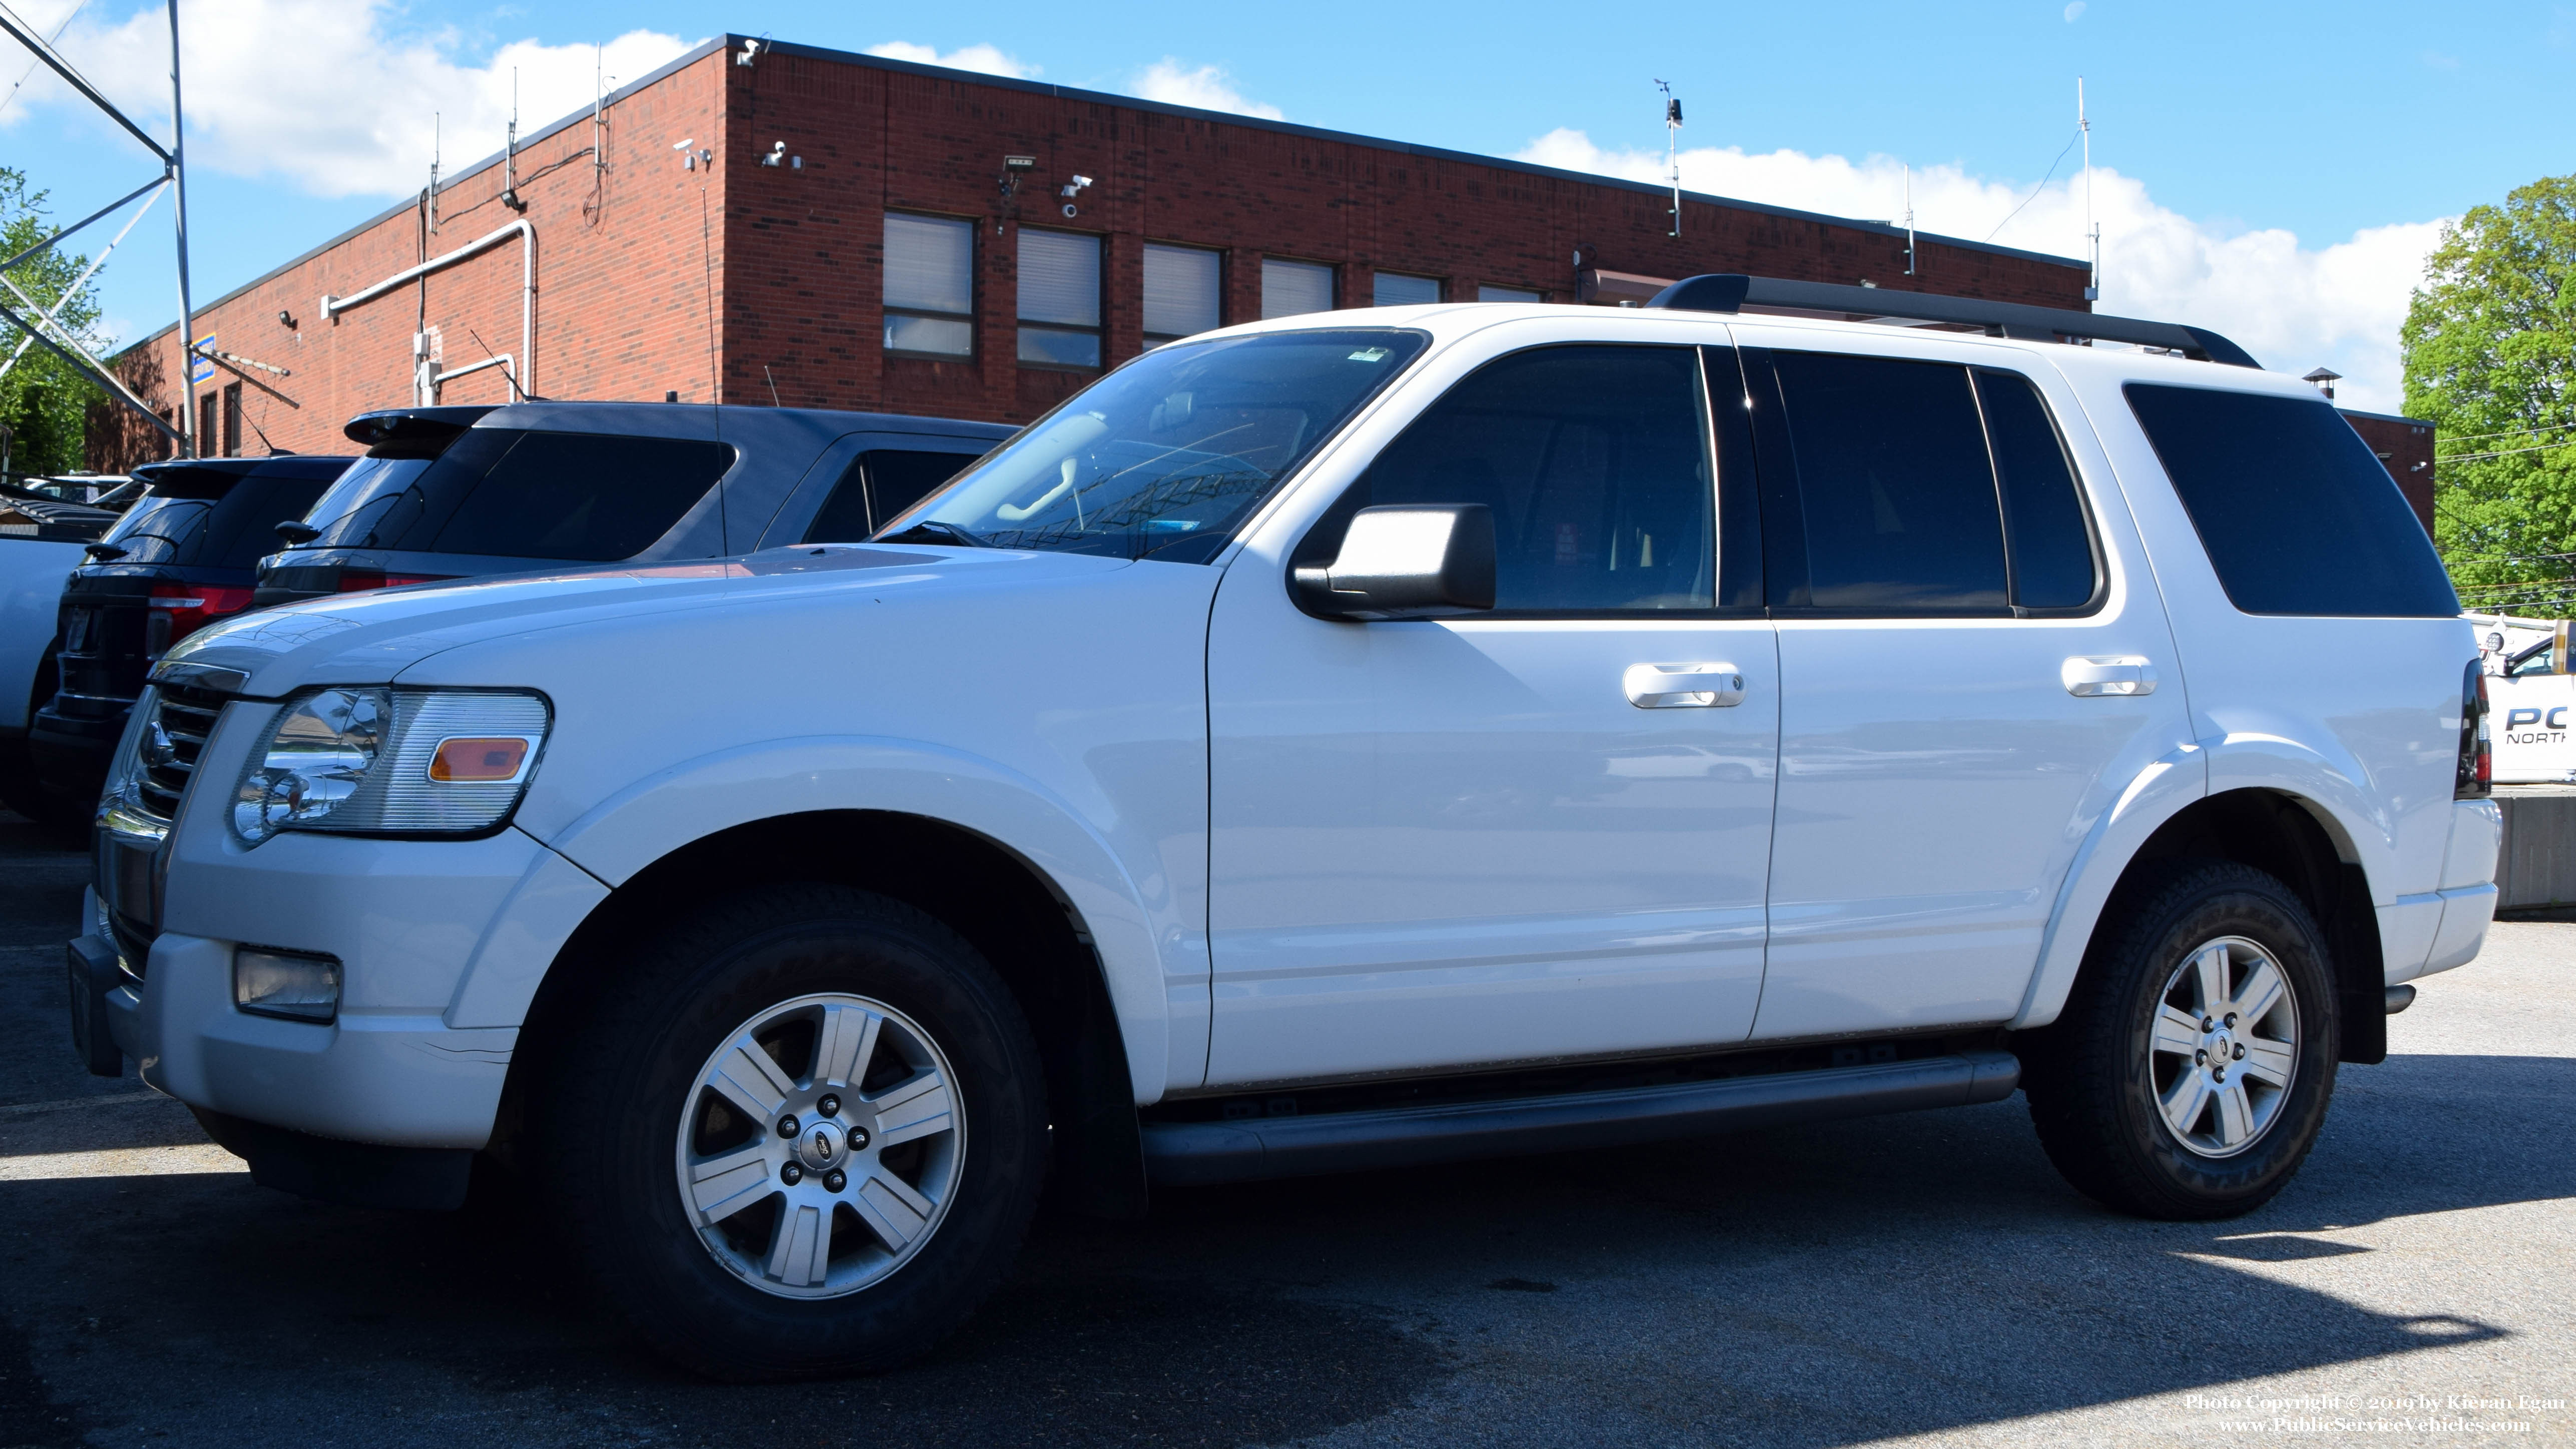 A photo  of North Providence Police
            Cruiser 1538, a 2010 Ford Explorer             taken by Kieran Egan